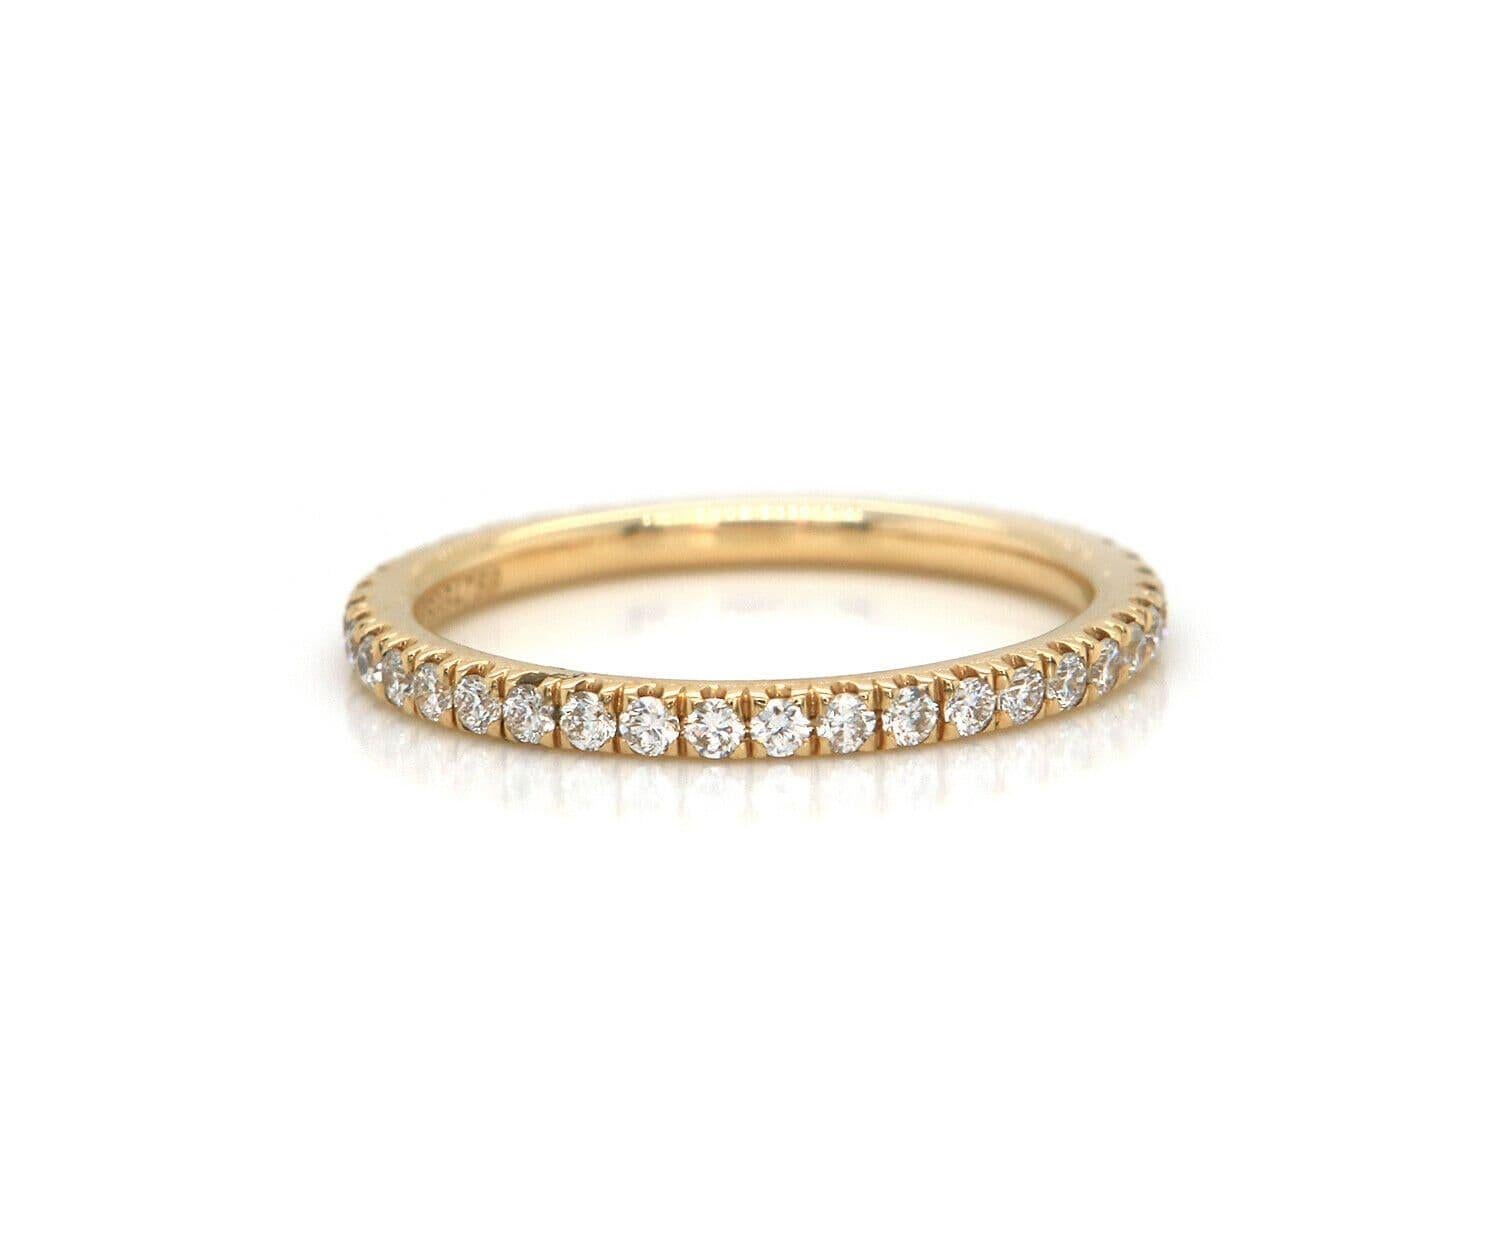 New Gabriel & Co. 0.48ctw Diamond Eternity Band Ring in 14K

Gabriel & Co. Diamond Eternity Band Ring
14K Yellow Gold
Diamonds Carat Weight: Approx. 0.48ctw
Clarity: SI2
Color: G – H
Band Width: Approx. 1.7 MM
Ring Size: 6.0 (US)
Weight: Approx.